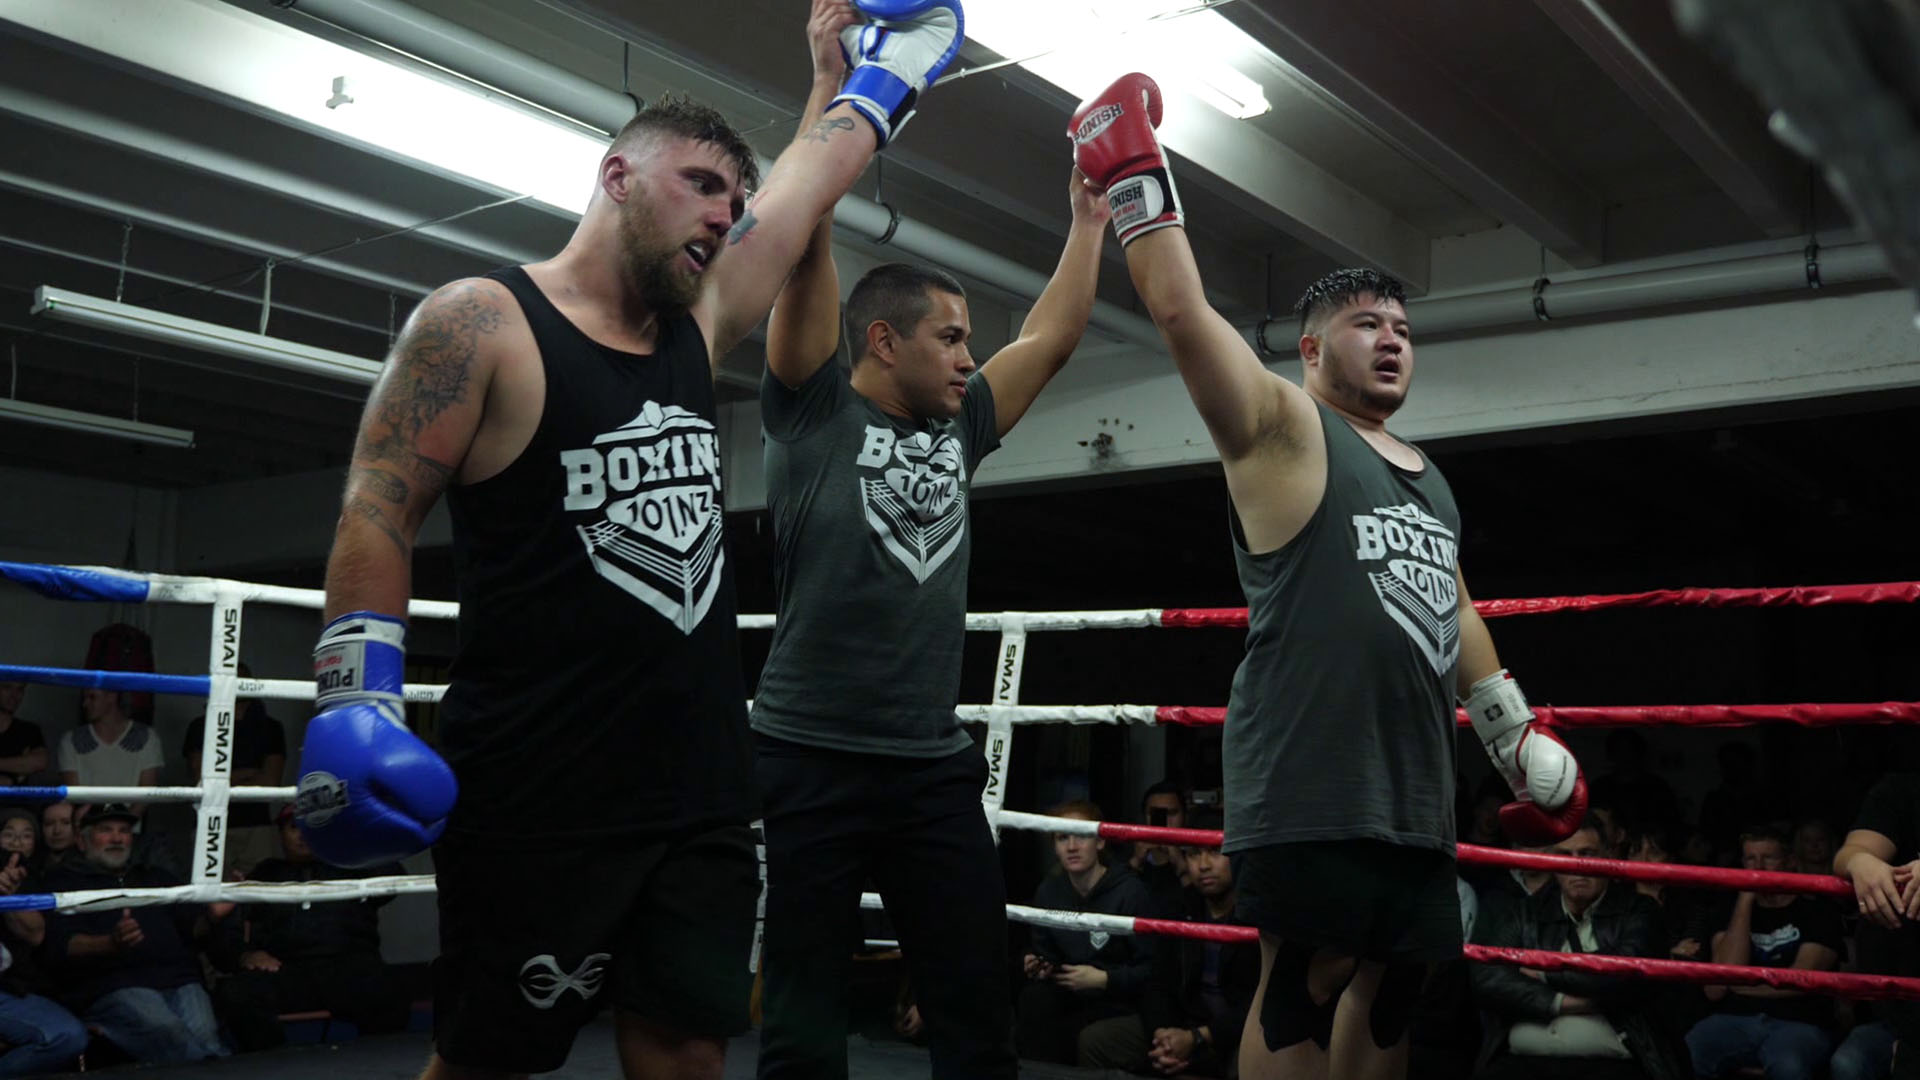 Auckland Corporate Boxing Fight Winners